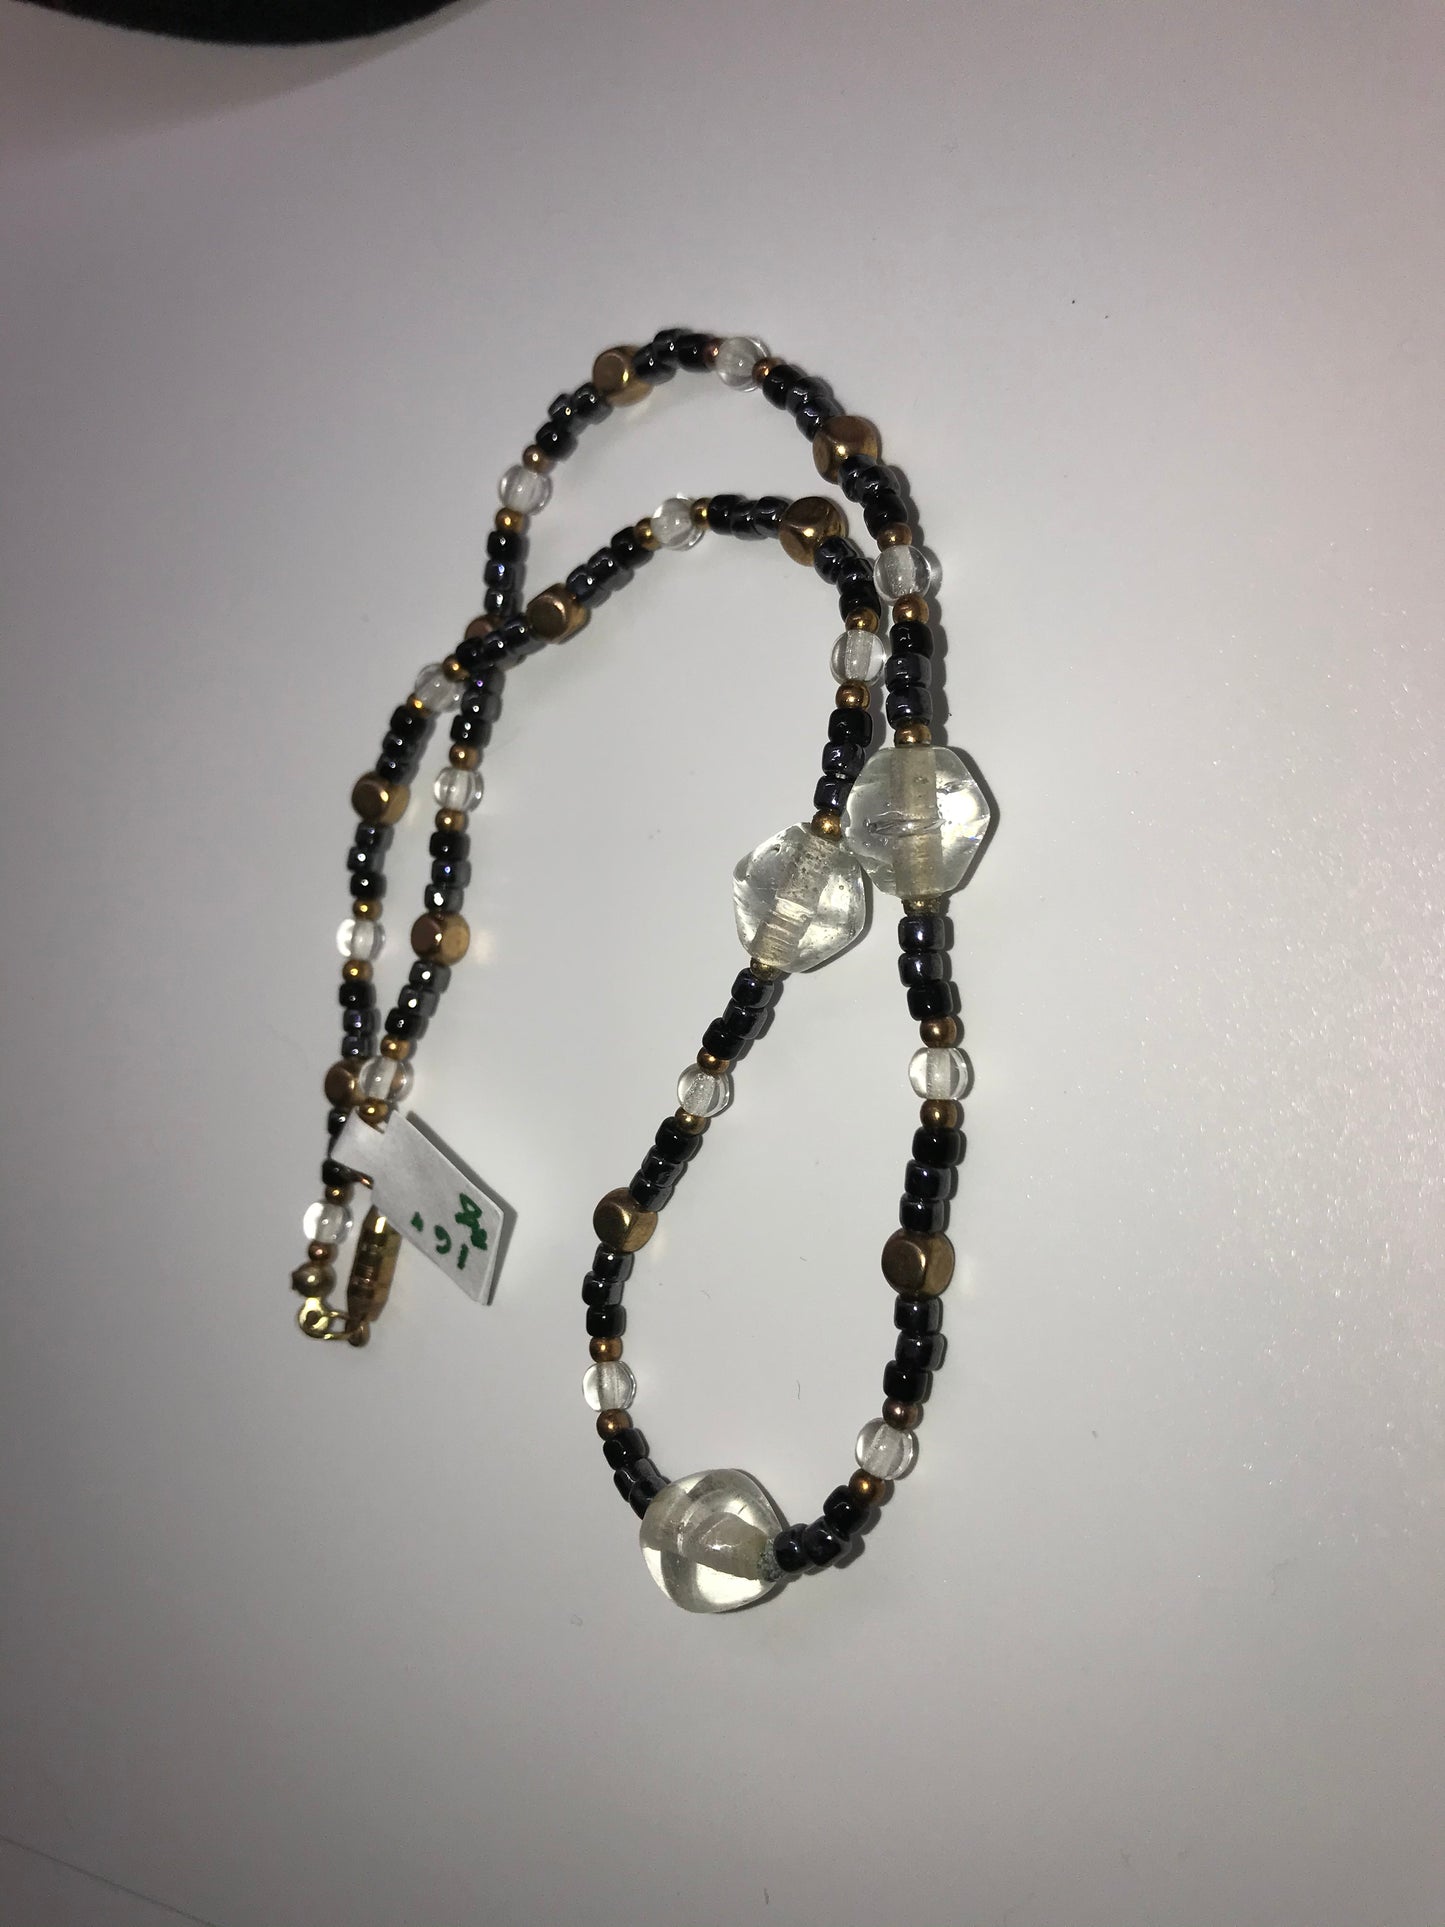 16" Black, Clear and Gold Beaded Necklace.